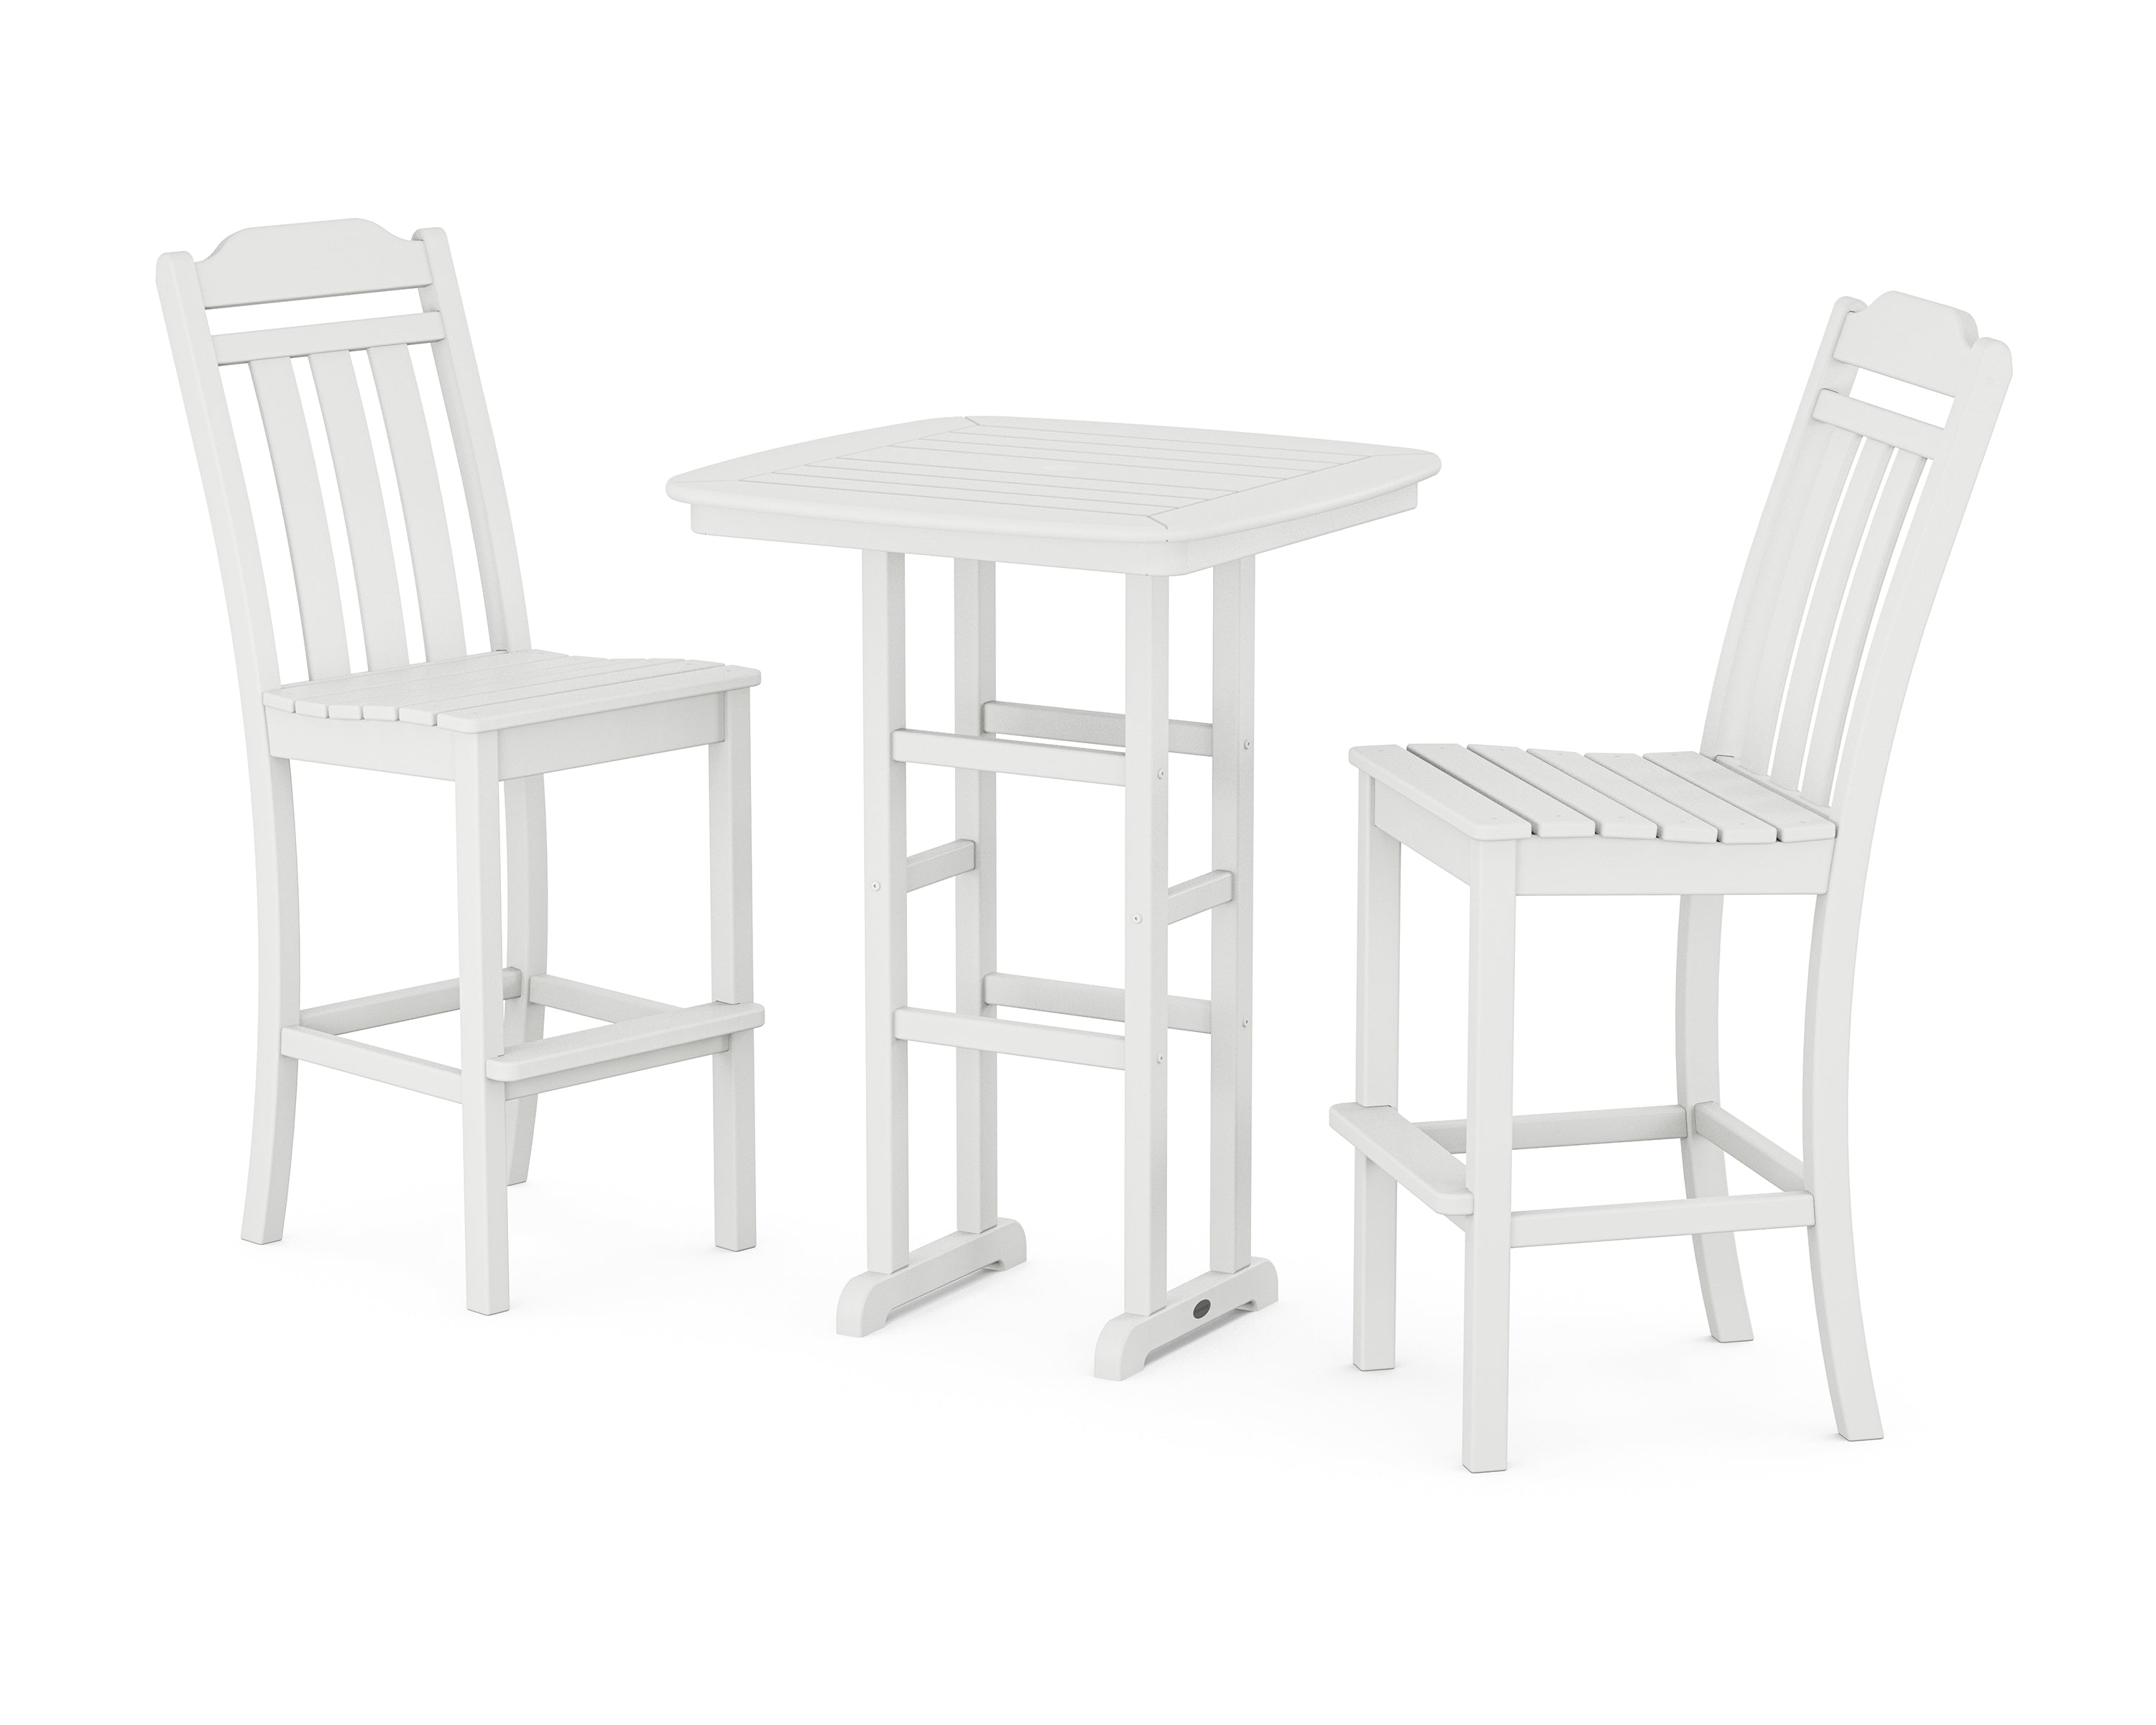 POLYWOOD Country Living 3-Piece Bar Set in White